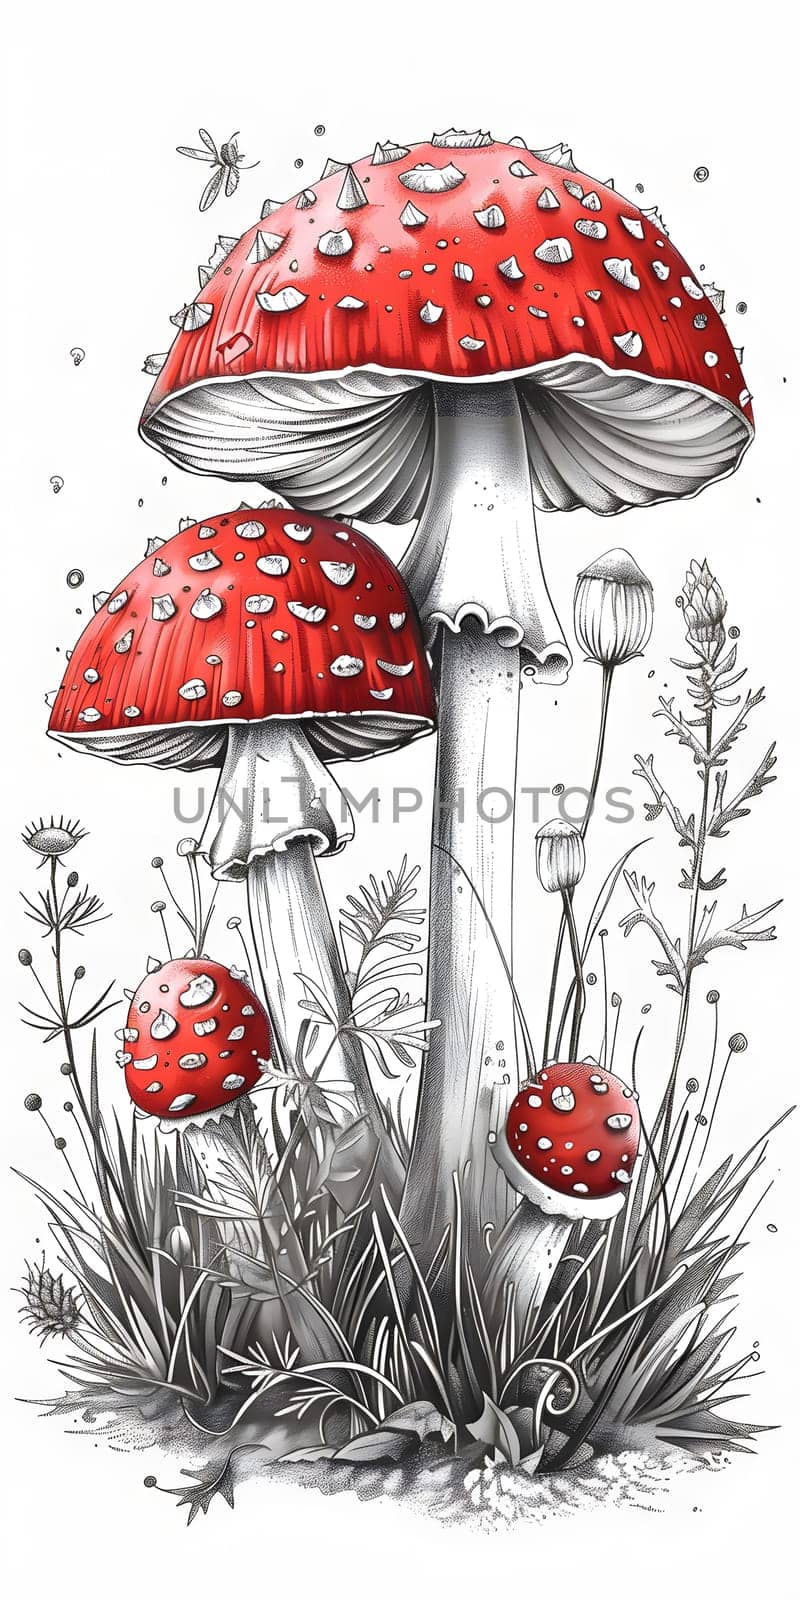 Artistic pencil drawing of three red mushrooms in grass by Nadtochiy